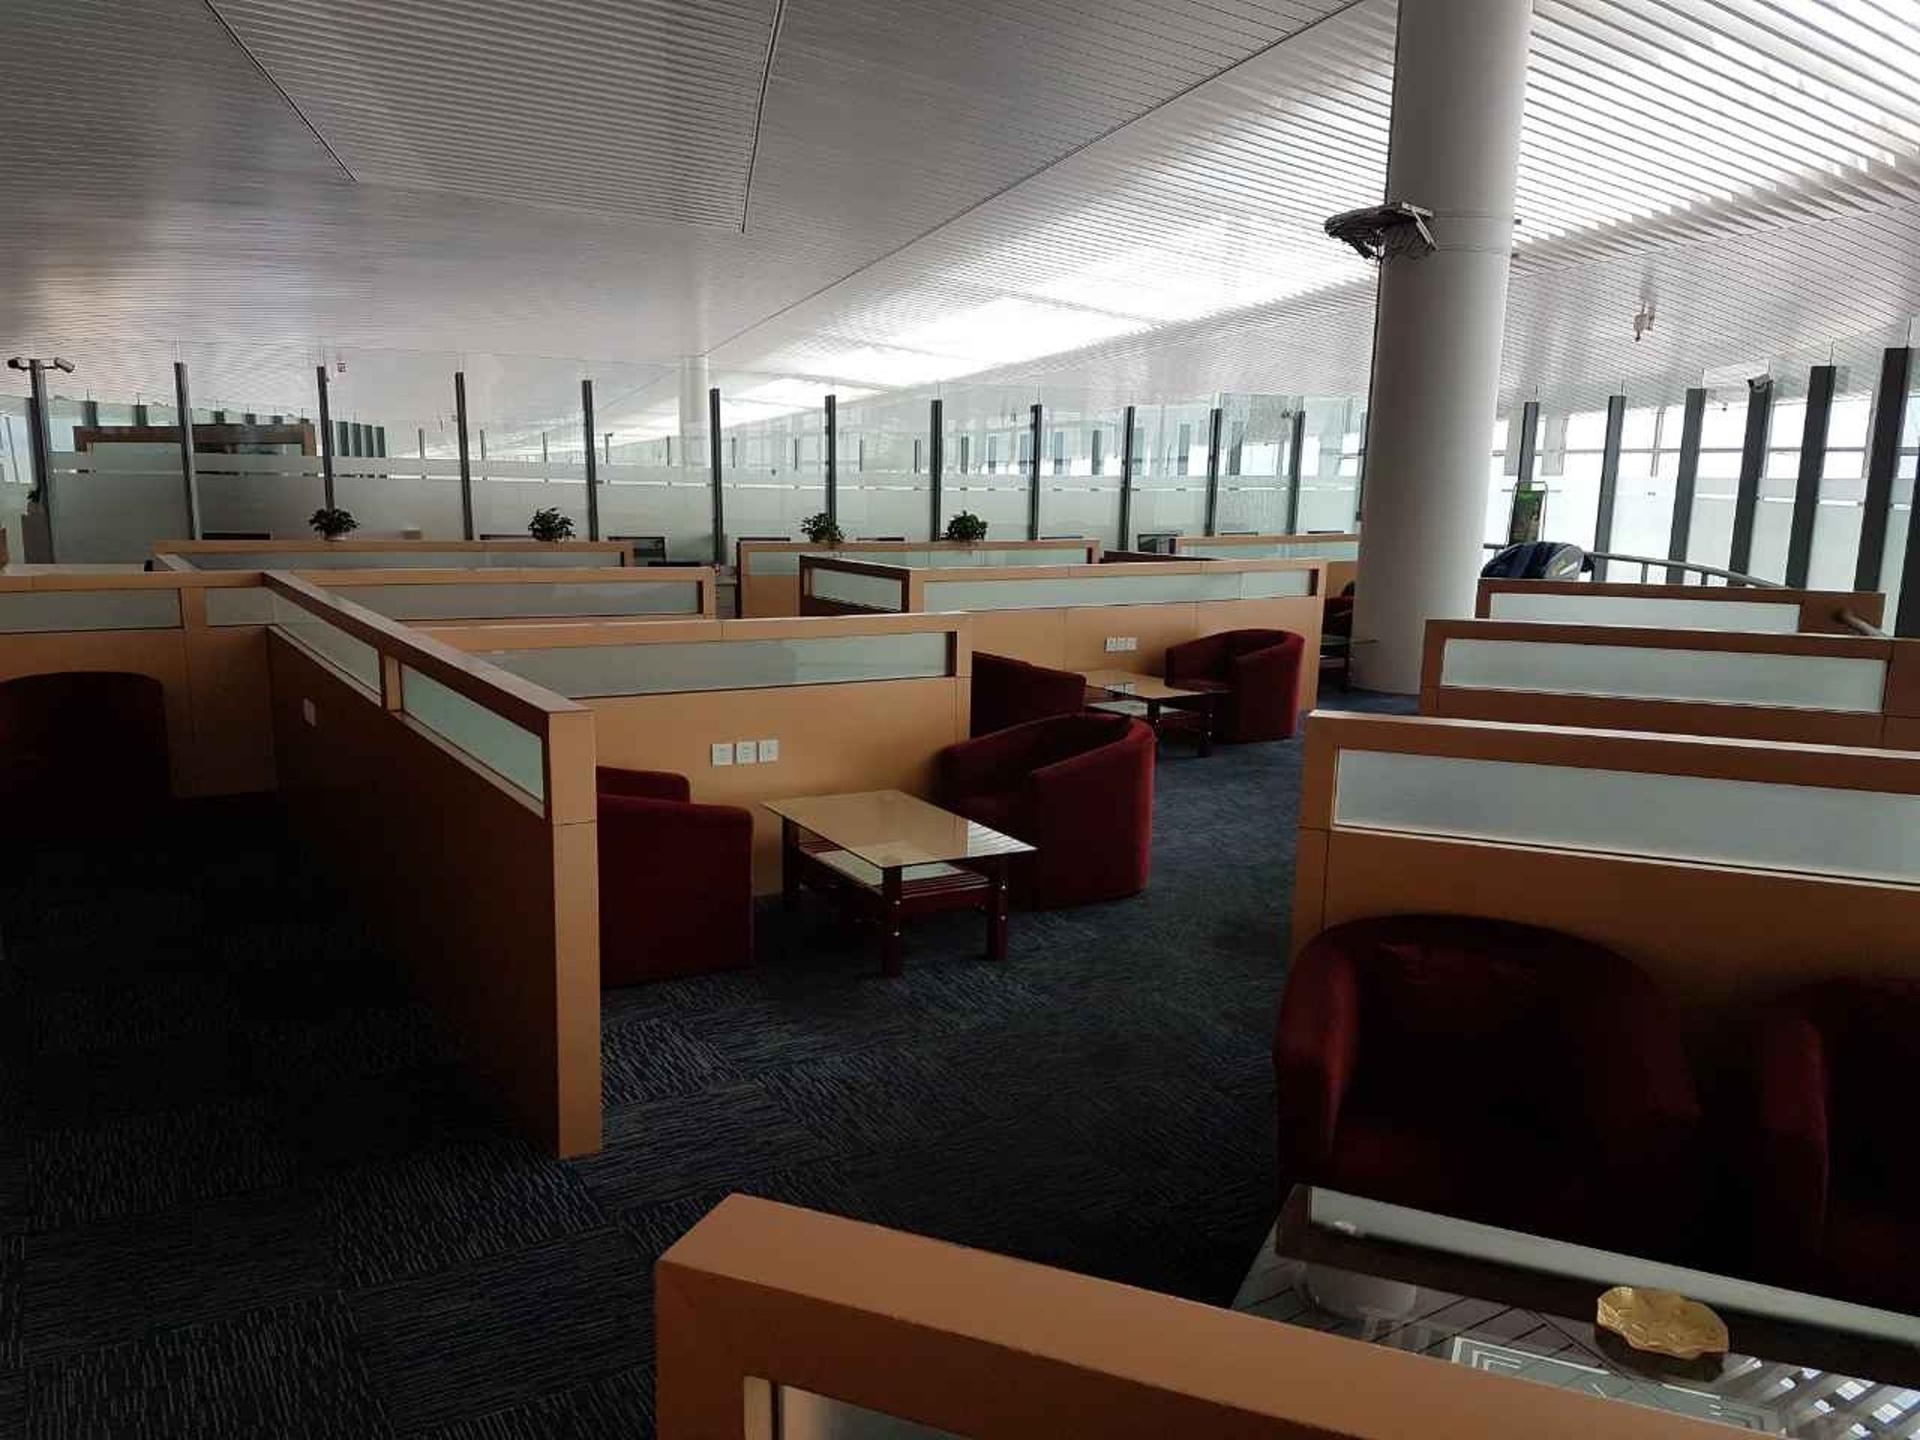 Yantai Airport First Class Lounge image 3 of 6